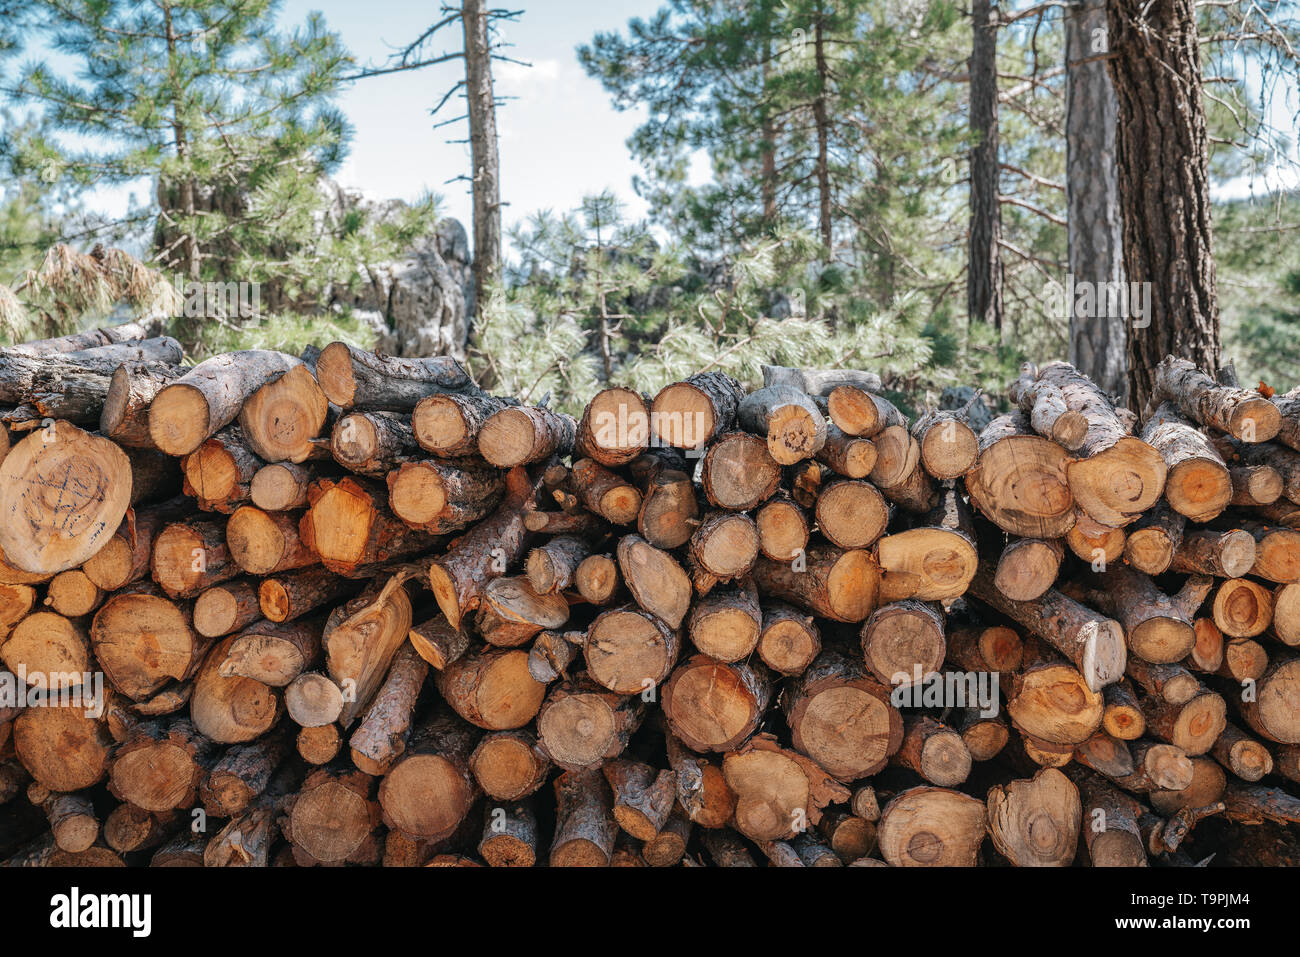 A pile of wooden logs prepares for the wood industry Stock Photo